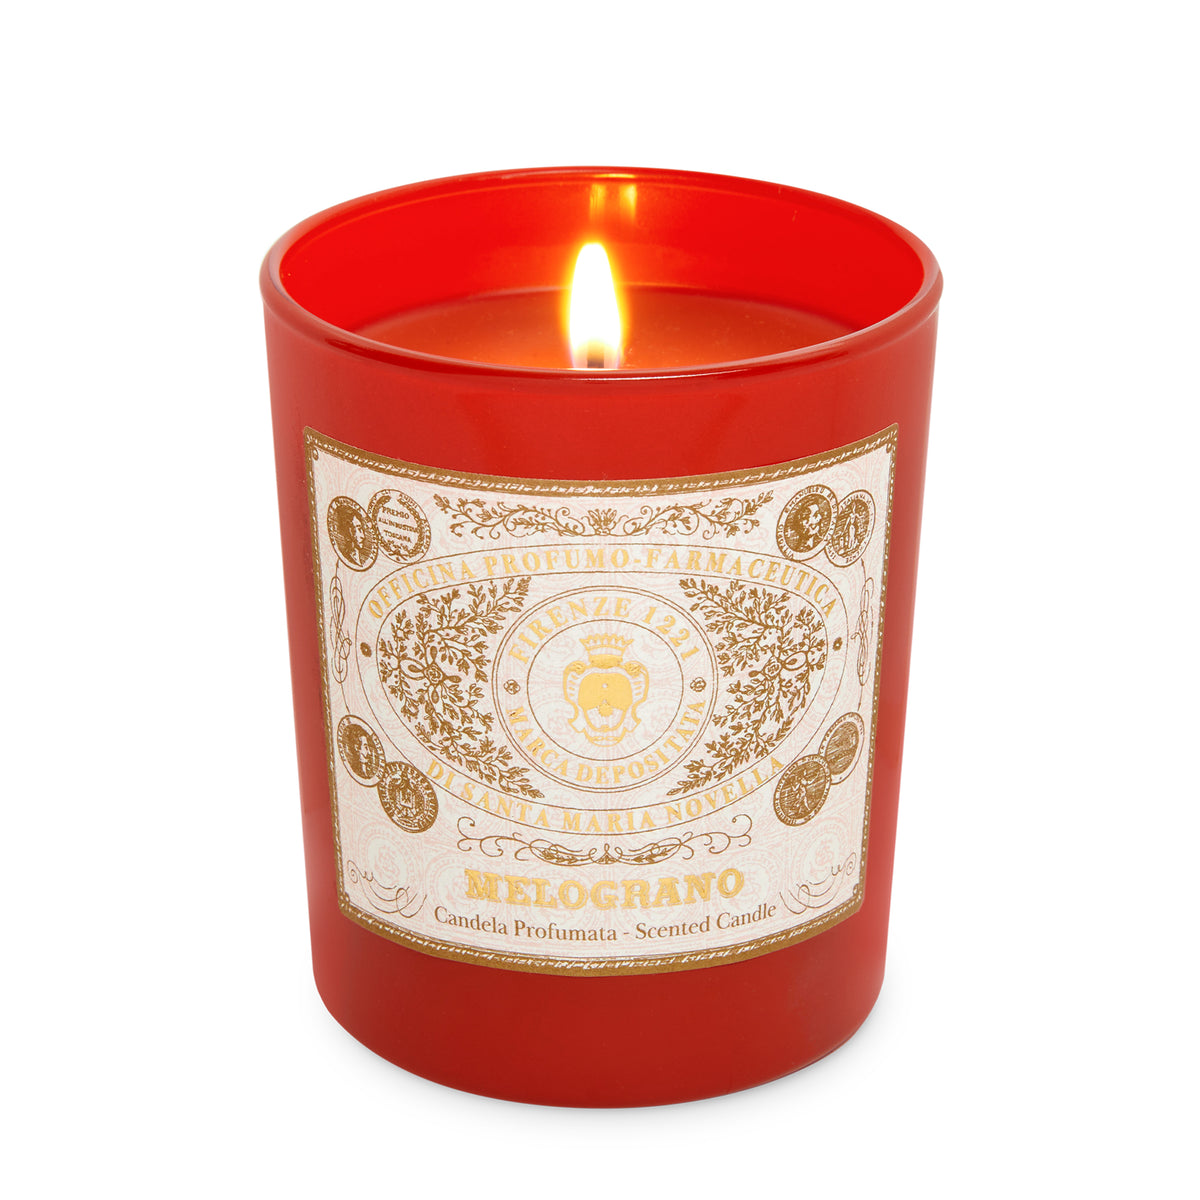 Primary Image of Melograno Scented Candle